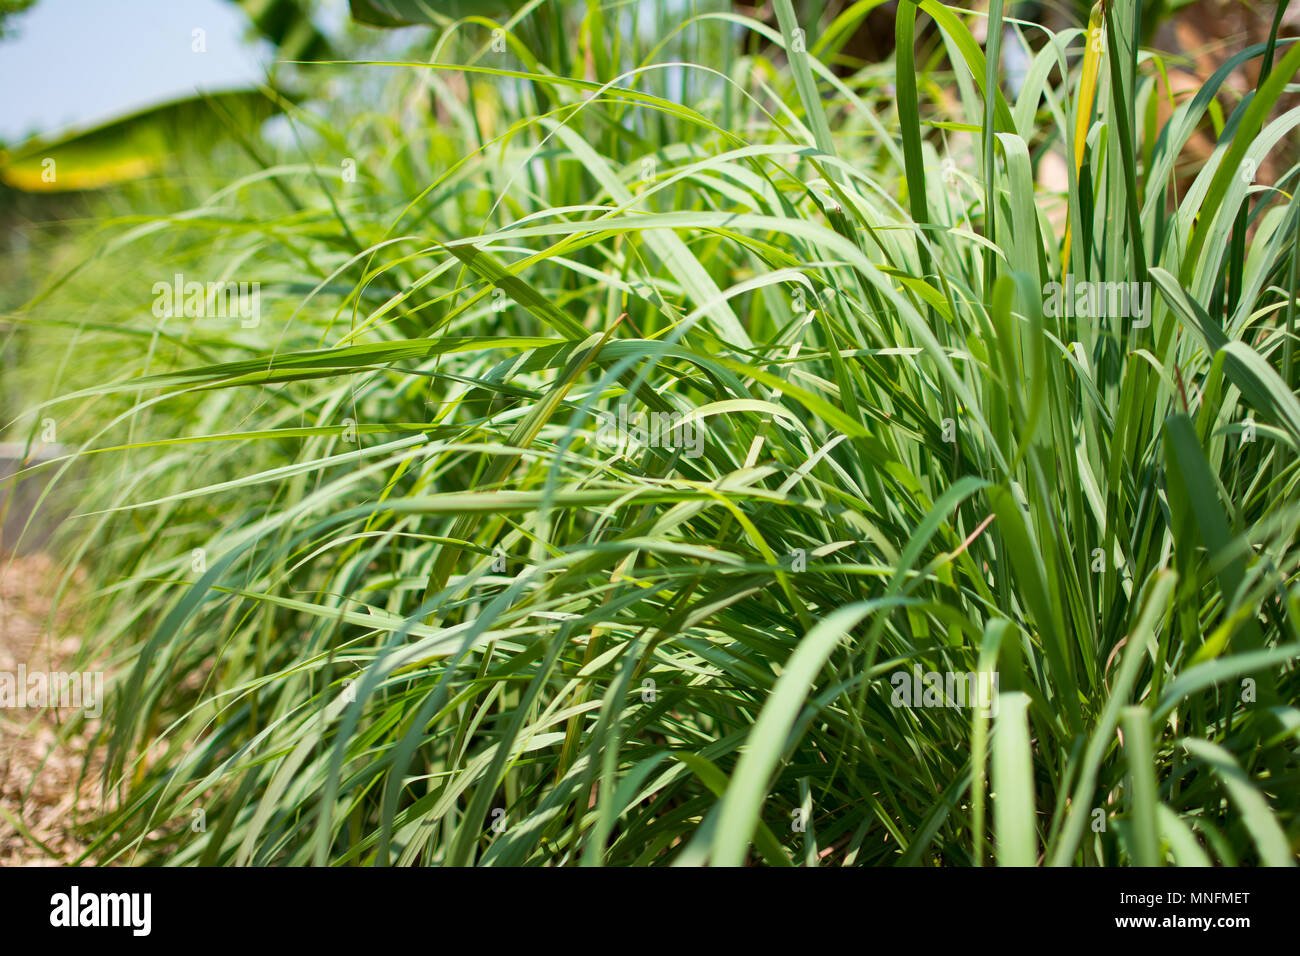 Lemongrass or Lapine or Lemon grass or West Indian or Cymbopogon citratus were planted on the ground. It is a shrub, its leaves are long and slender Stock Photo